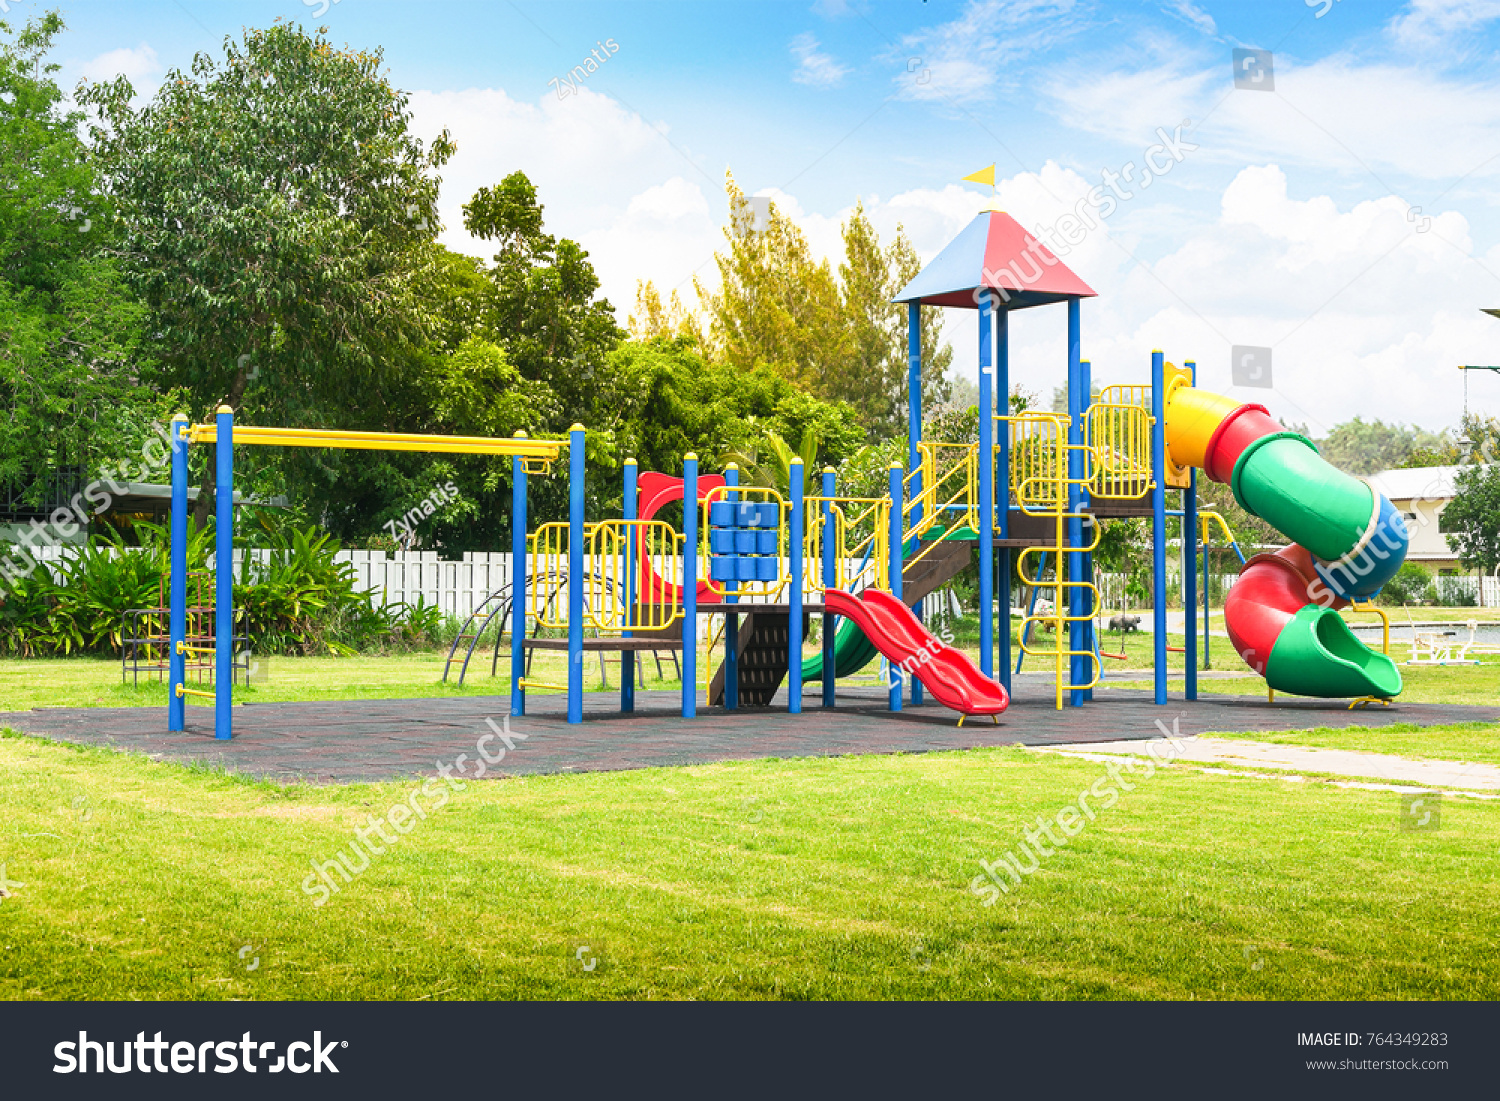 Colorful playground on yard in the park. #764349283